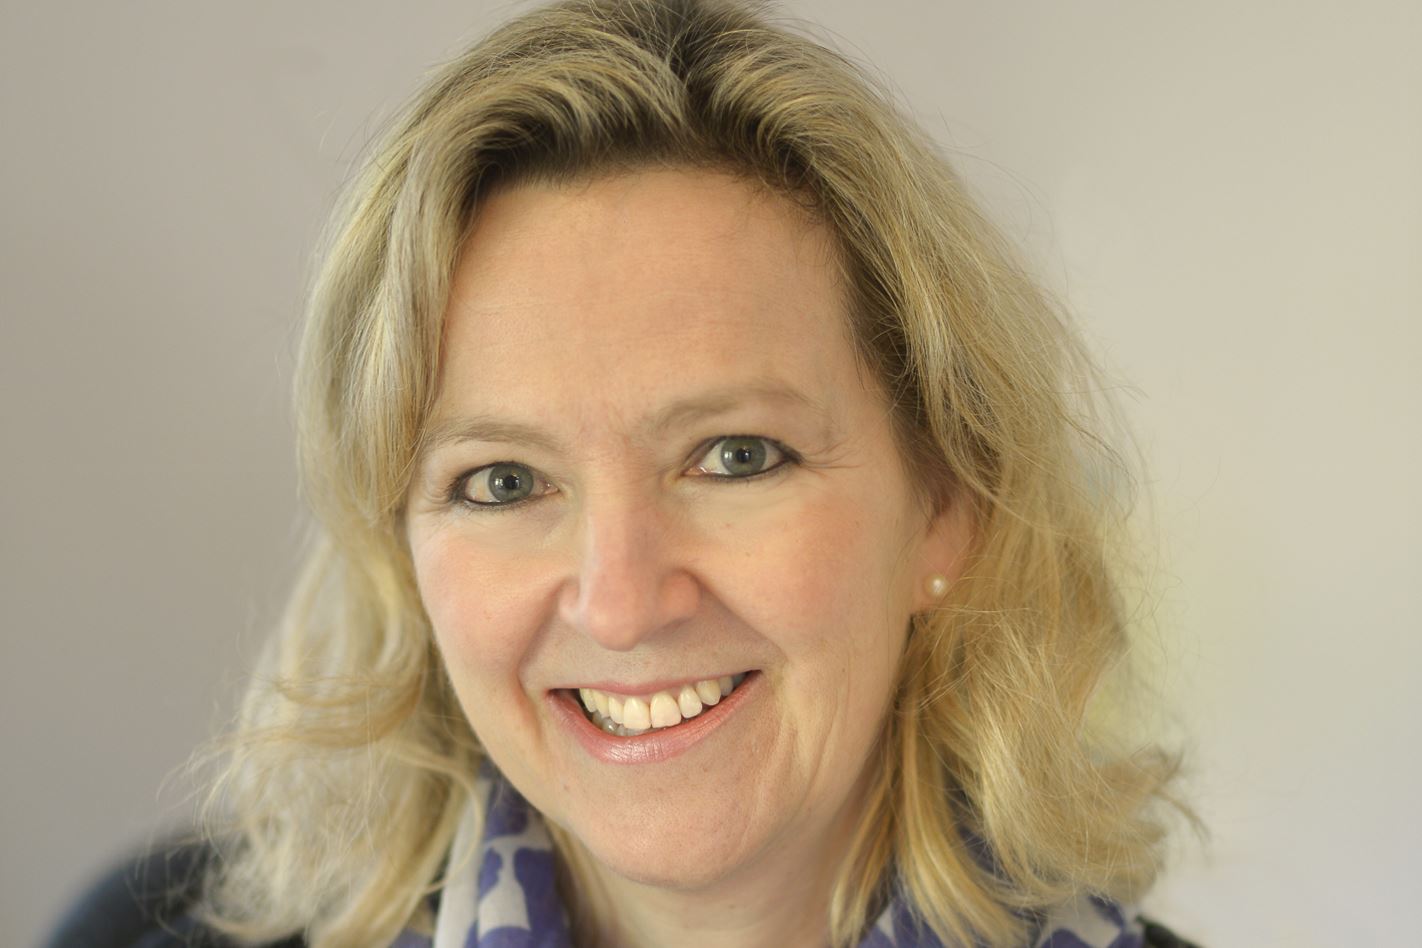 Jane Appleton, Professor in Primary and Community Care, Faculty of Health and Life Sciences at Oxford Brookes University